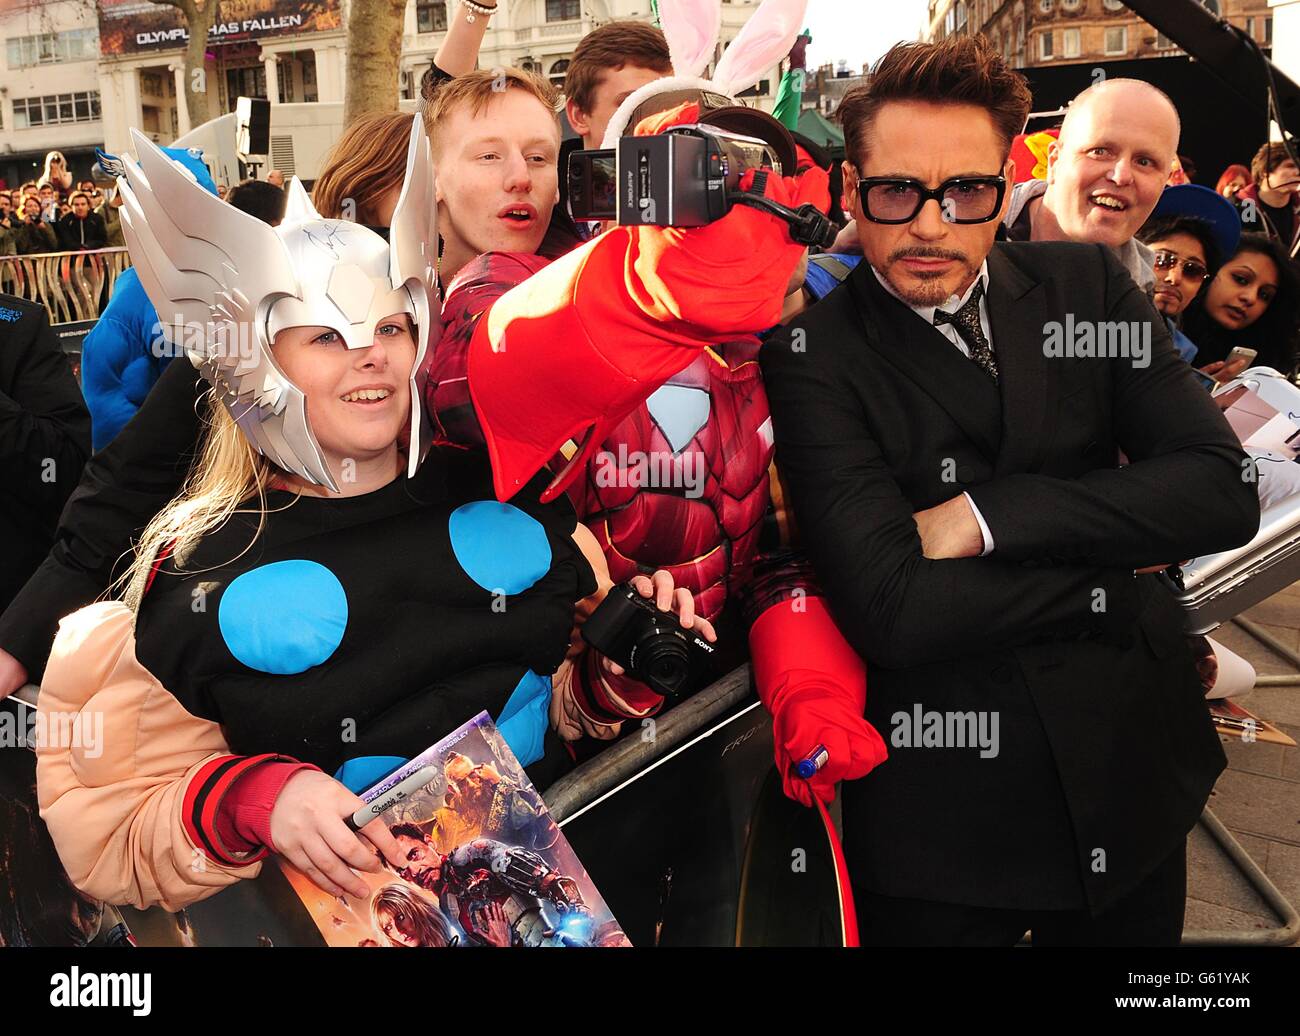 Robert Downey Jr poses with fans at the premiere of Iron Man 3 at the Odeon Leicester Square, London. Stock Photo